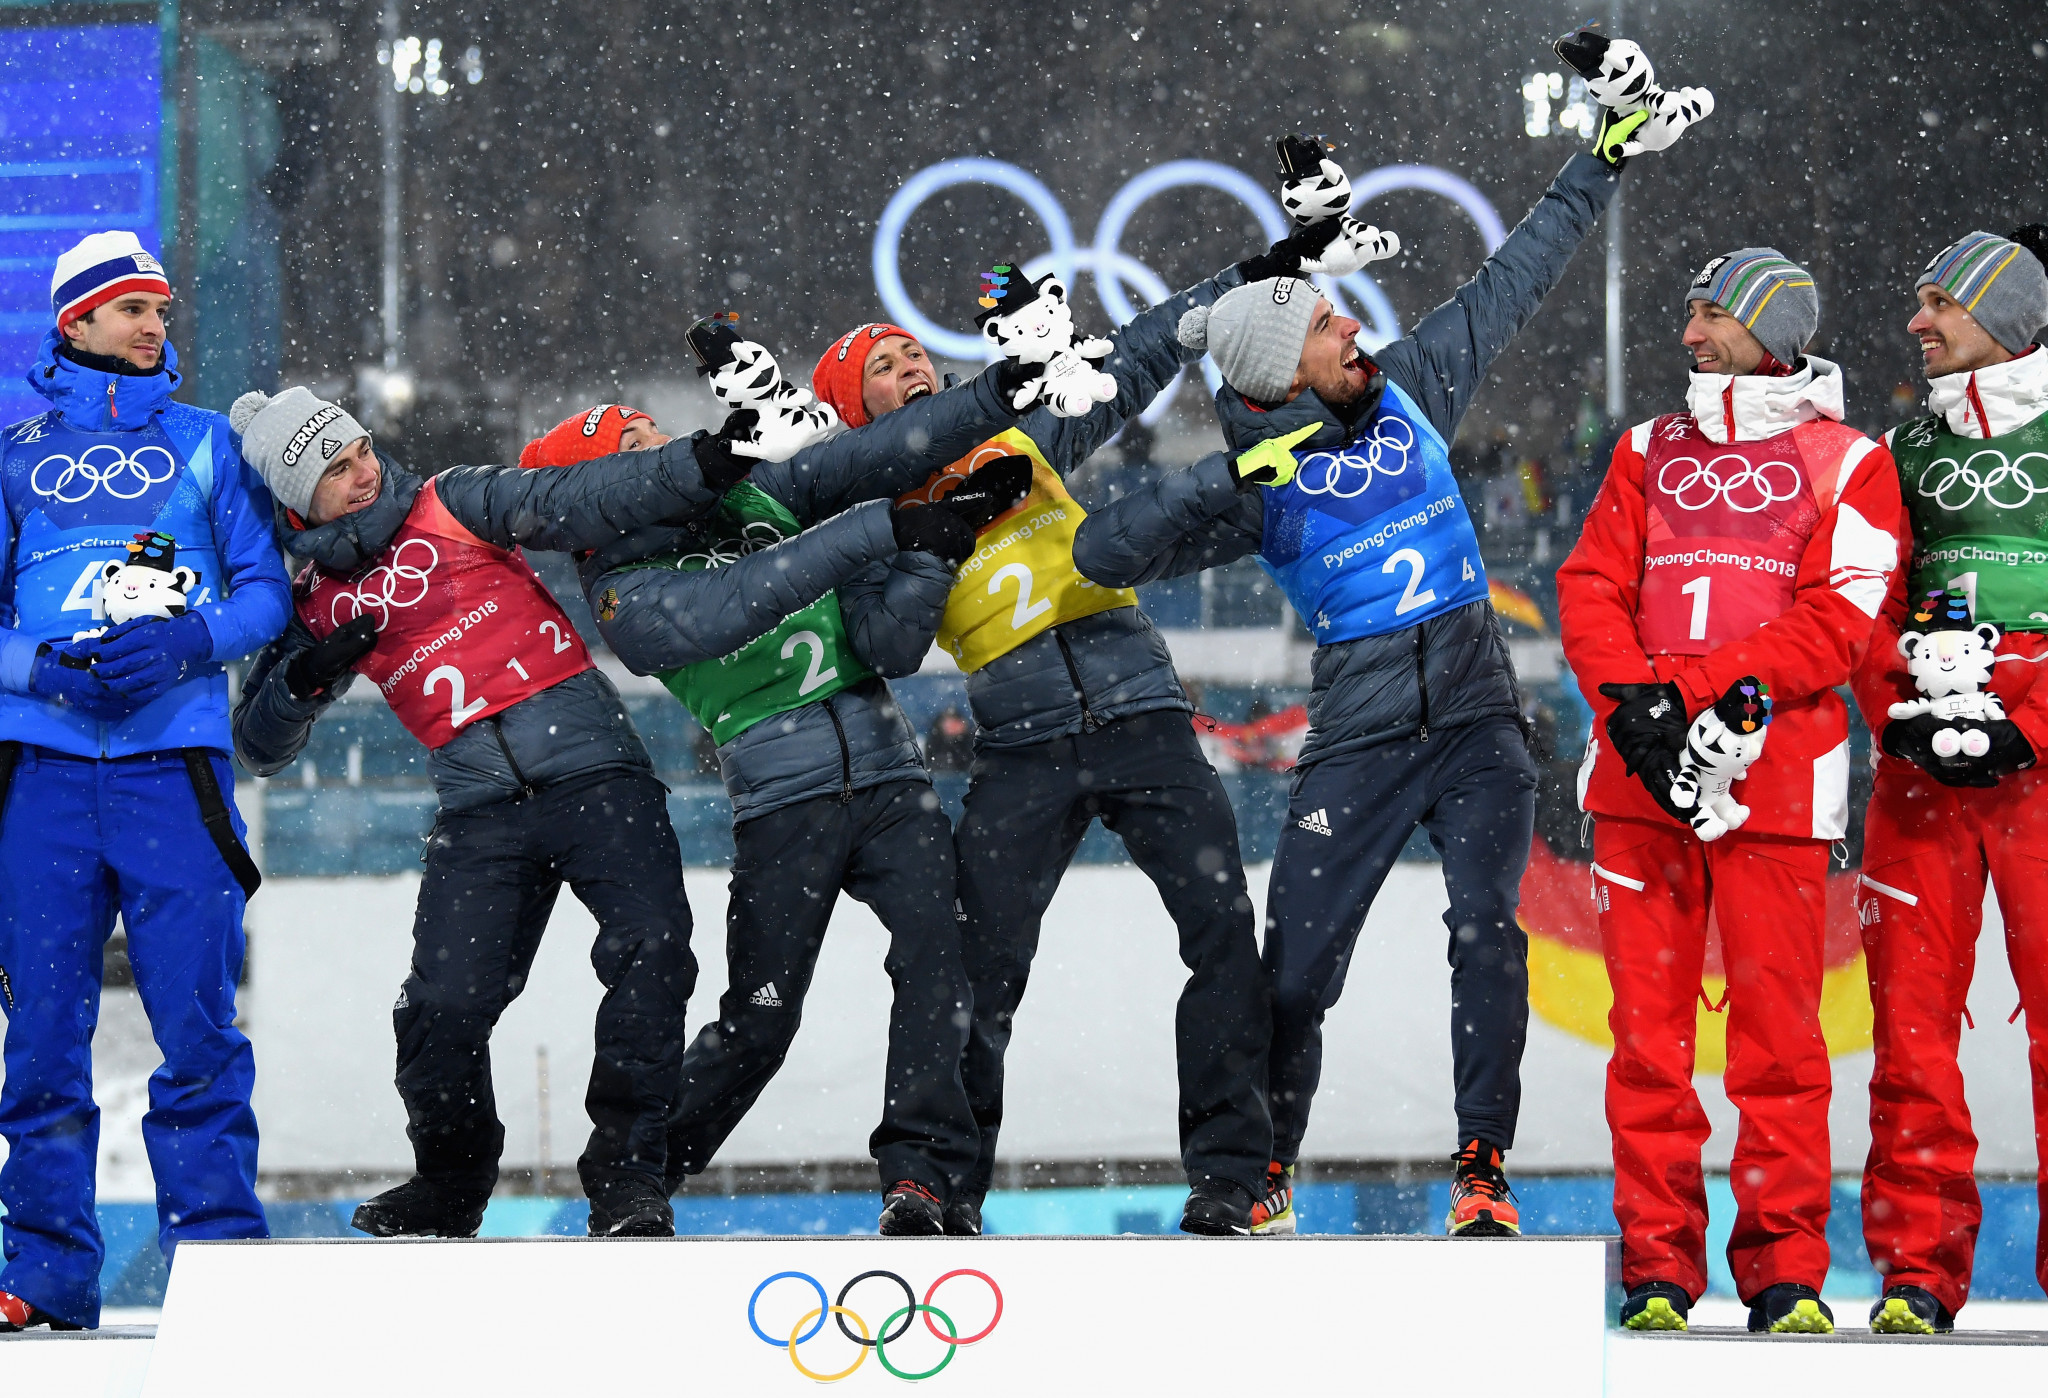 Germany’s Olympic gold medal-winning Nordic combined team struck the "Lightning Bolt" pose on the Pyeongchang 2018 winners' podium ©Getty Images